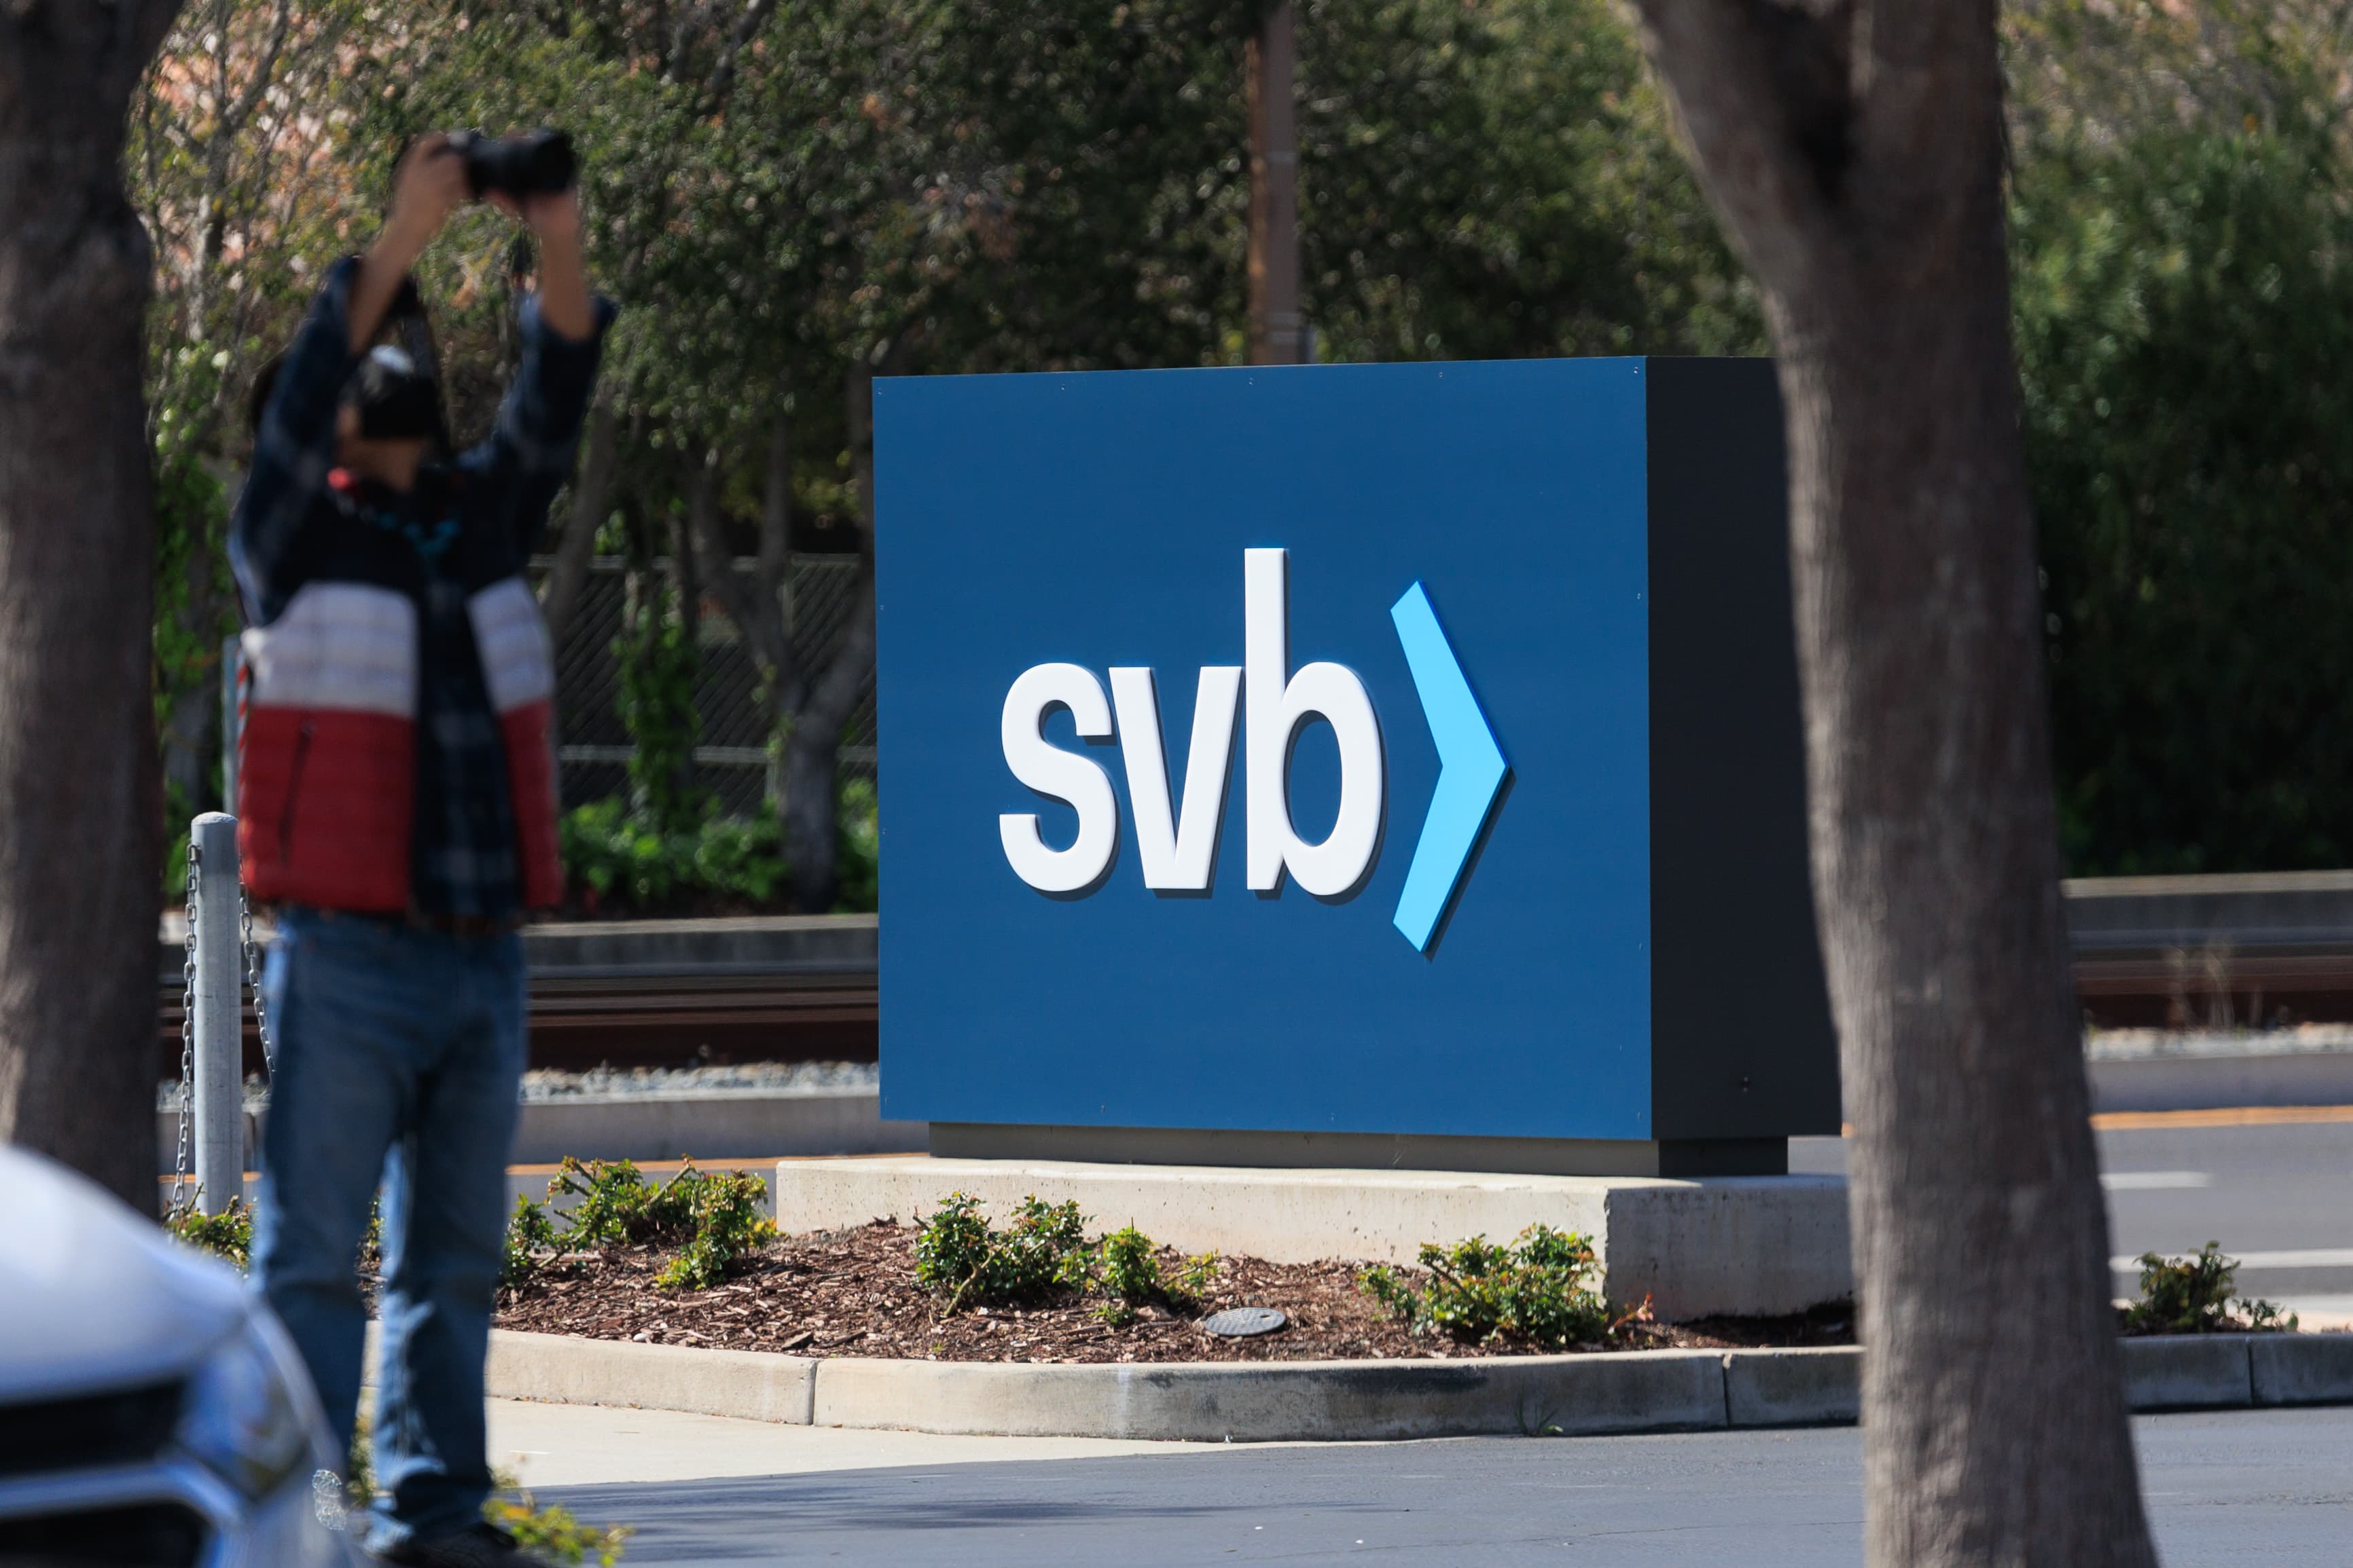 Southeast Asia VC firms are more affected by SVB fallout than start-ups